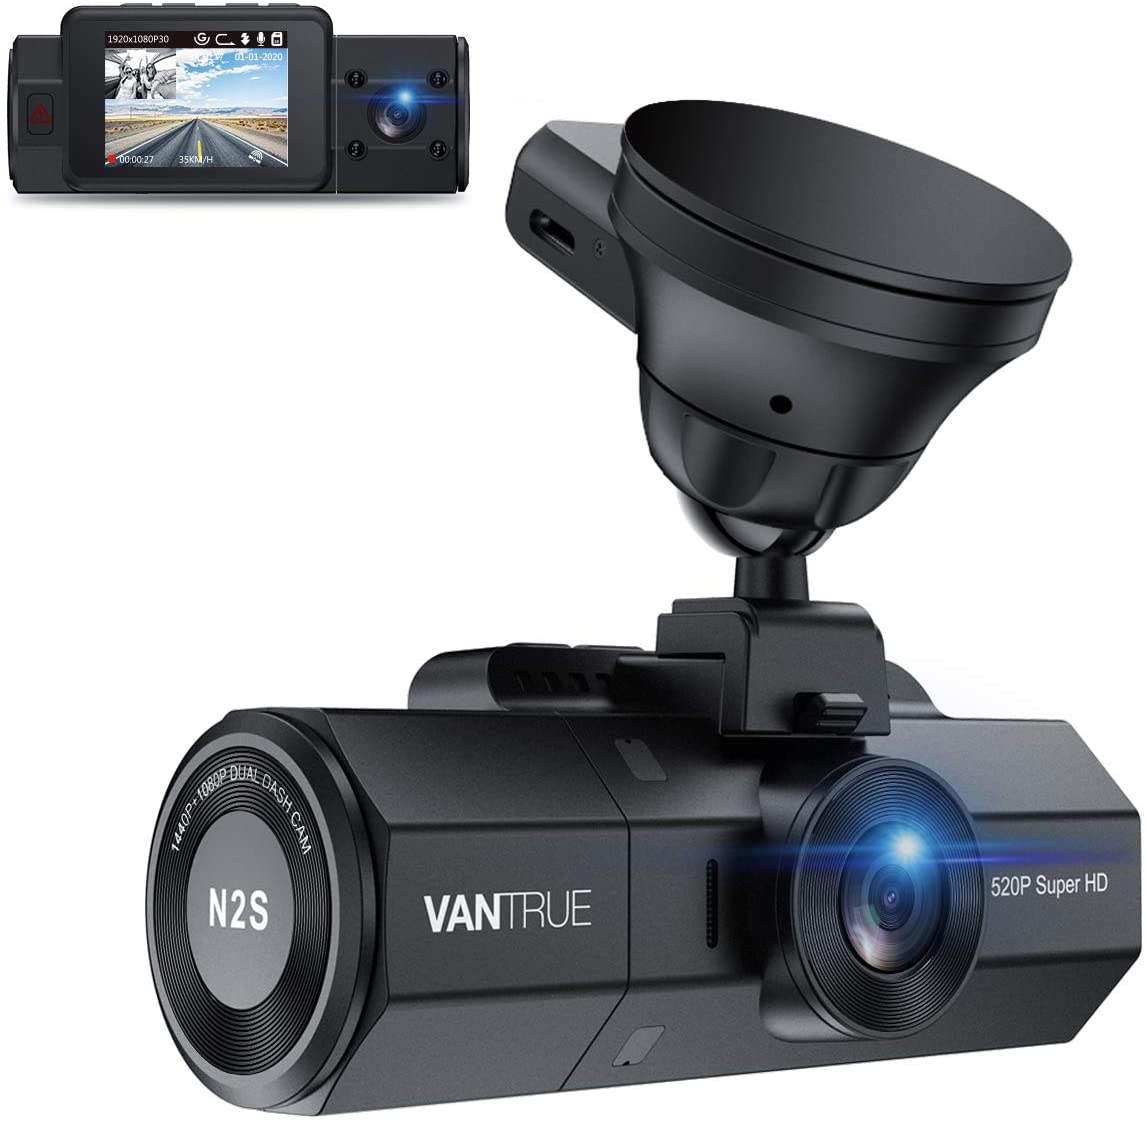 4-Channel Car Dash Cam for Cars, Taxi, Vans, Support 512GB /GPS/5g